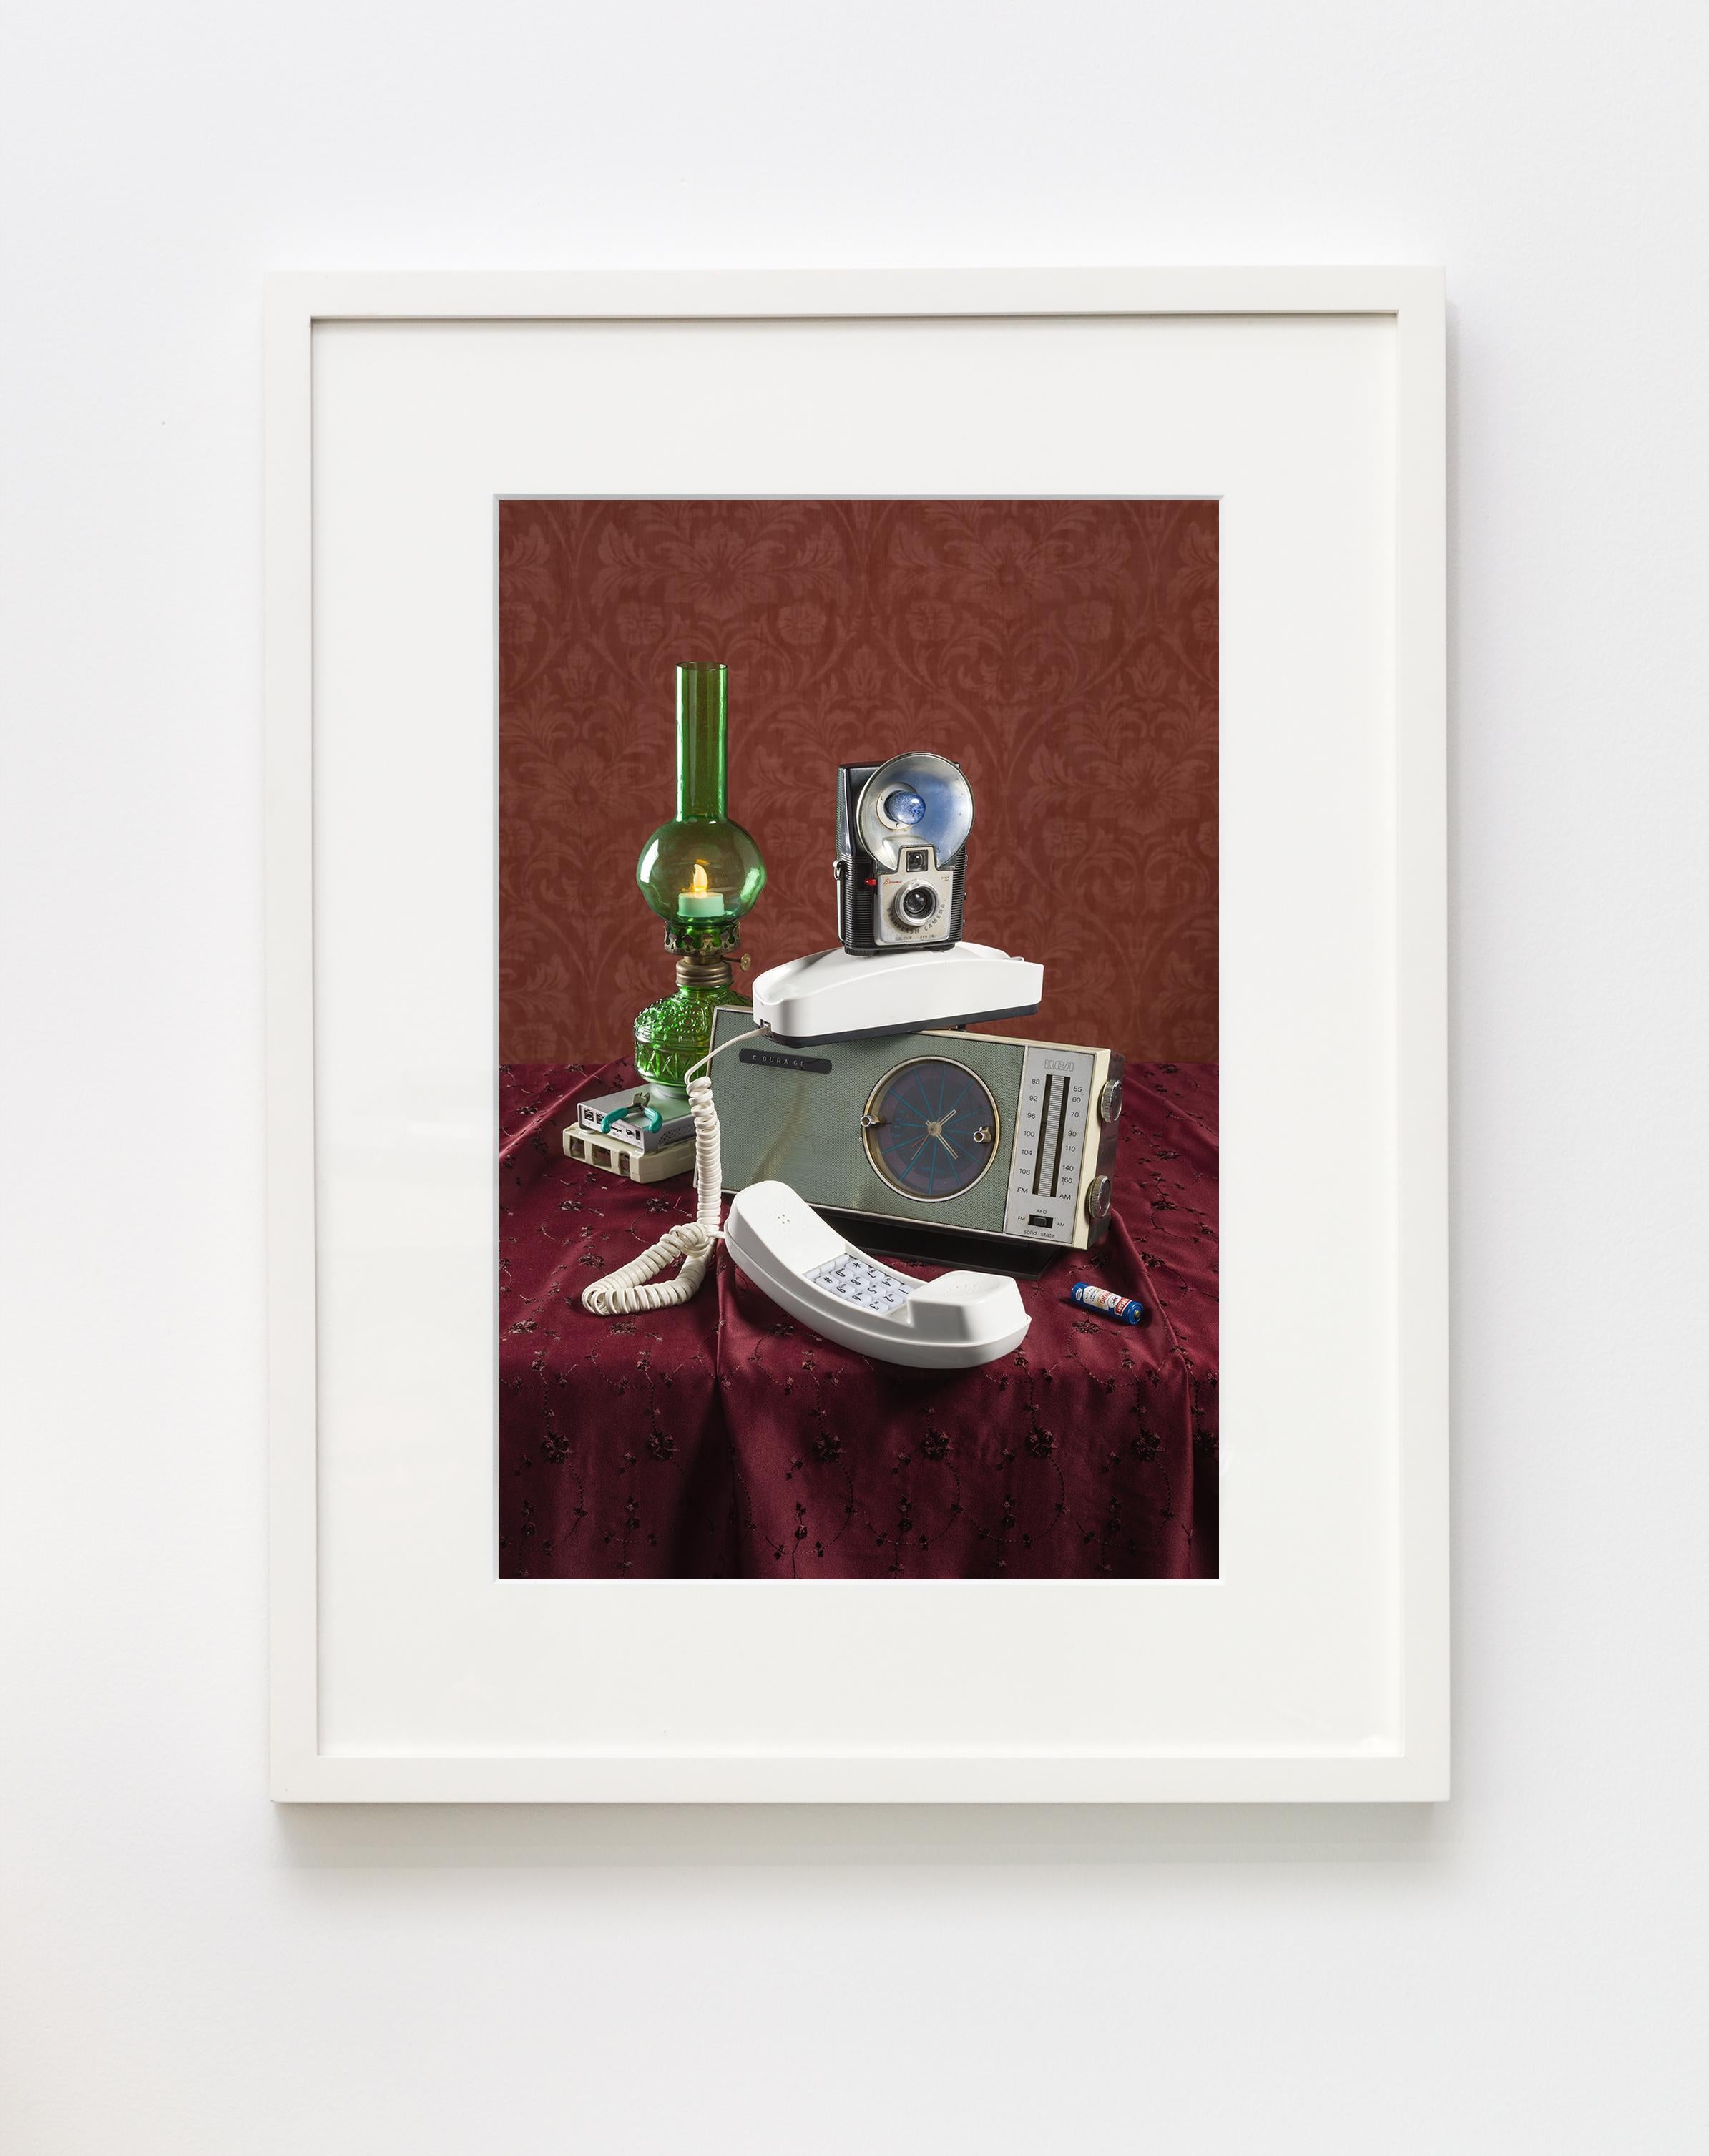 “Still Life with Clock Radio” Contemporary Still-life Photo with Vintage Tech - Photograph by Jeanette May